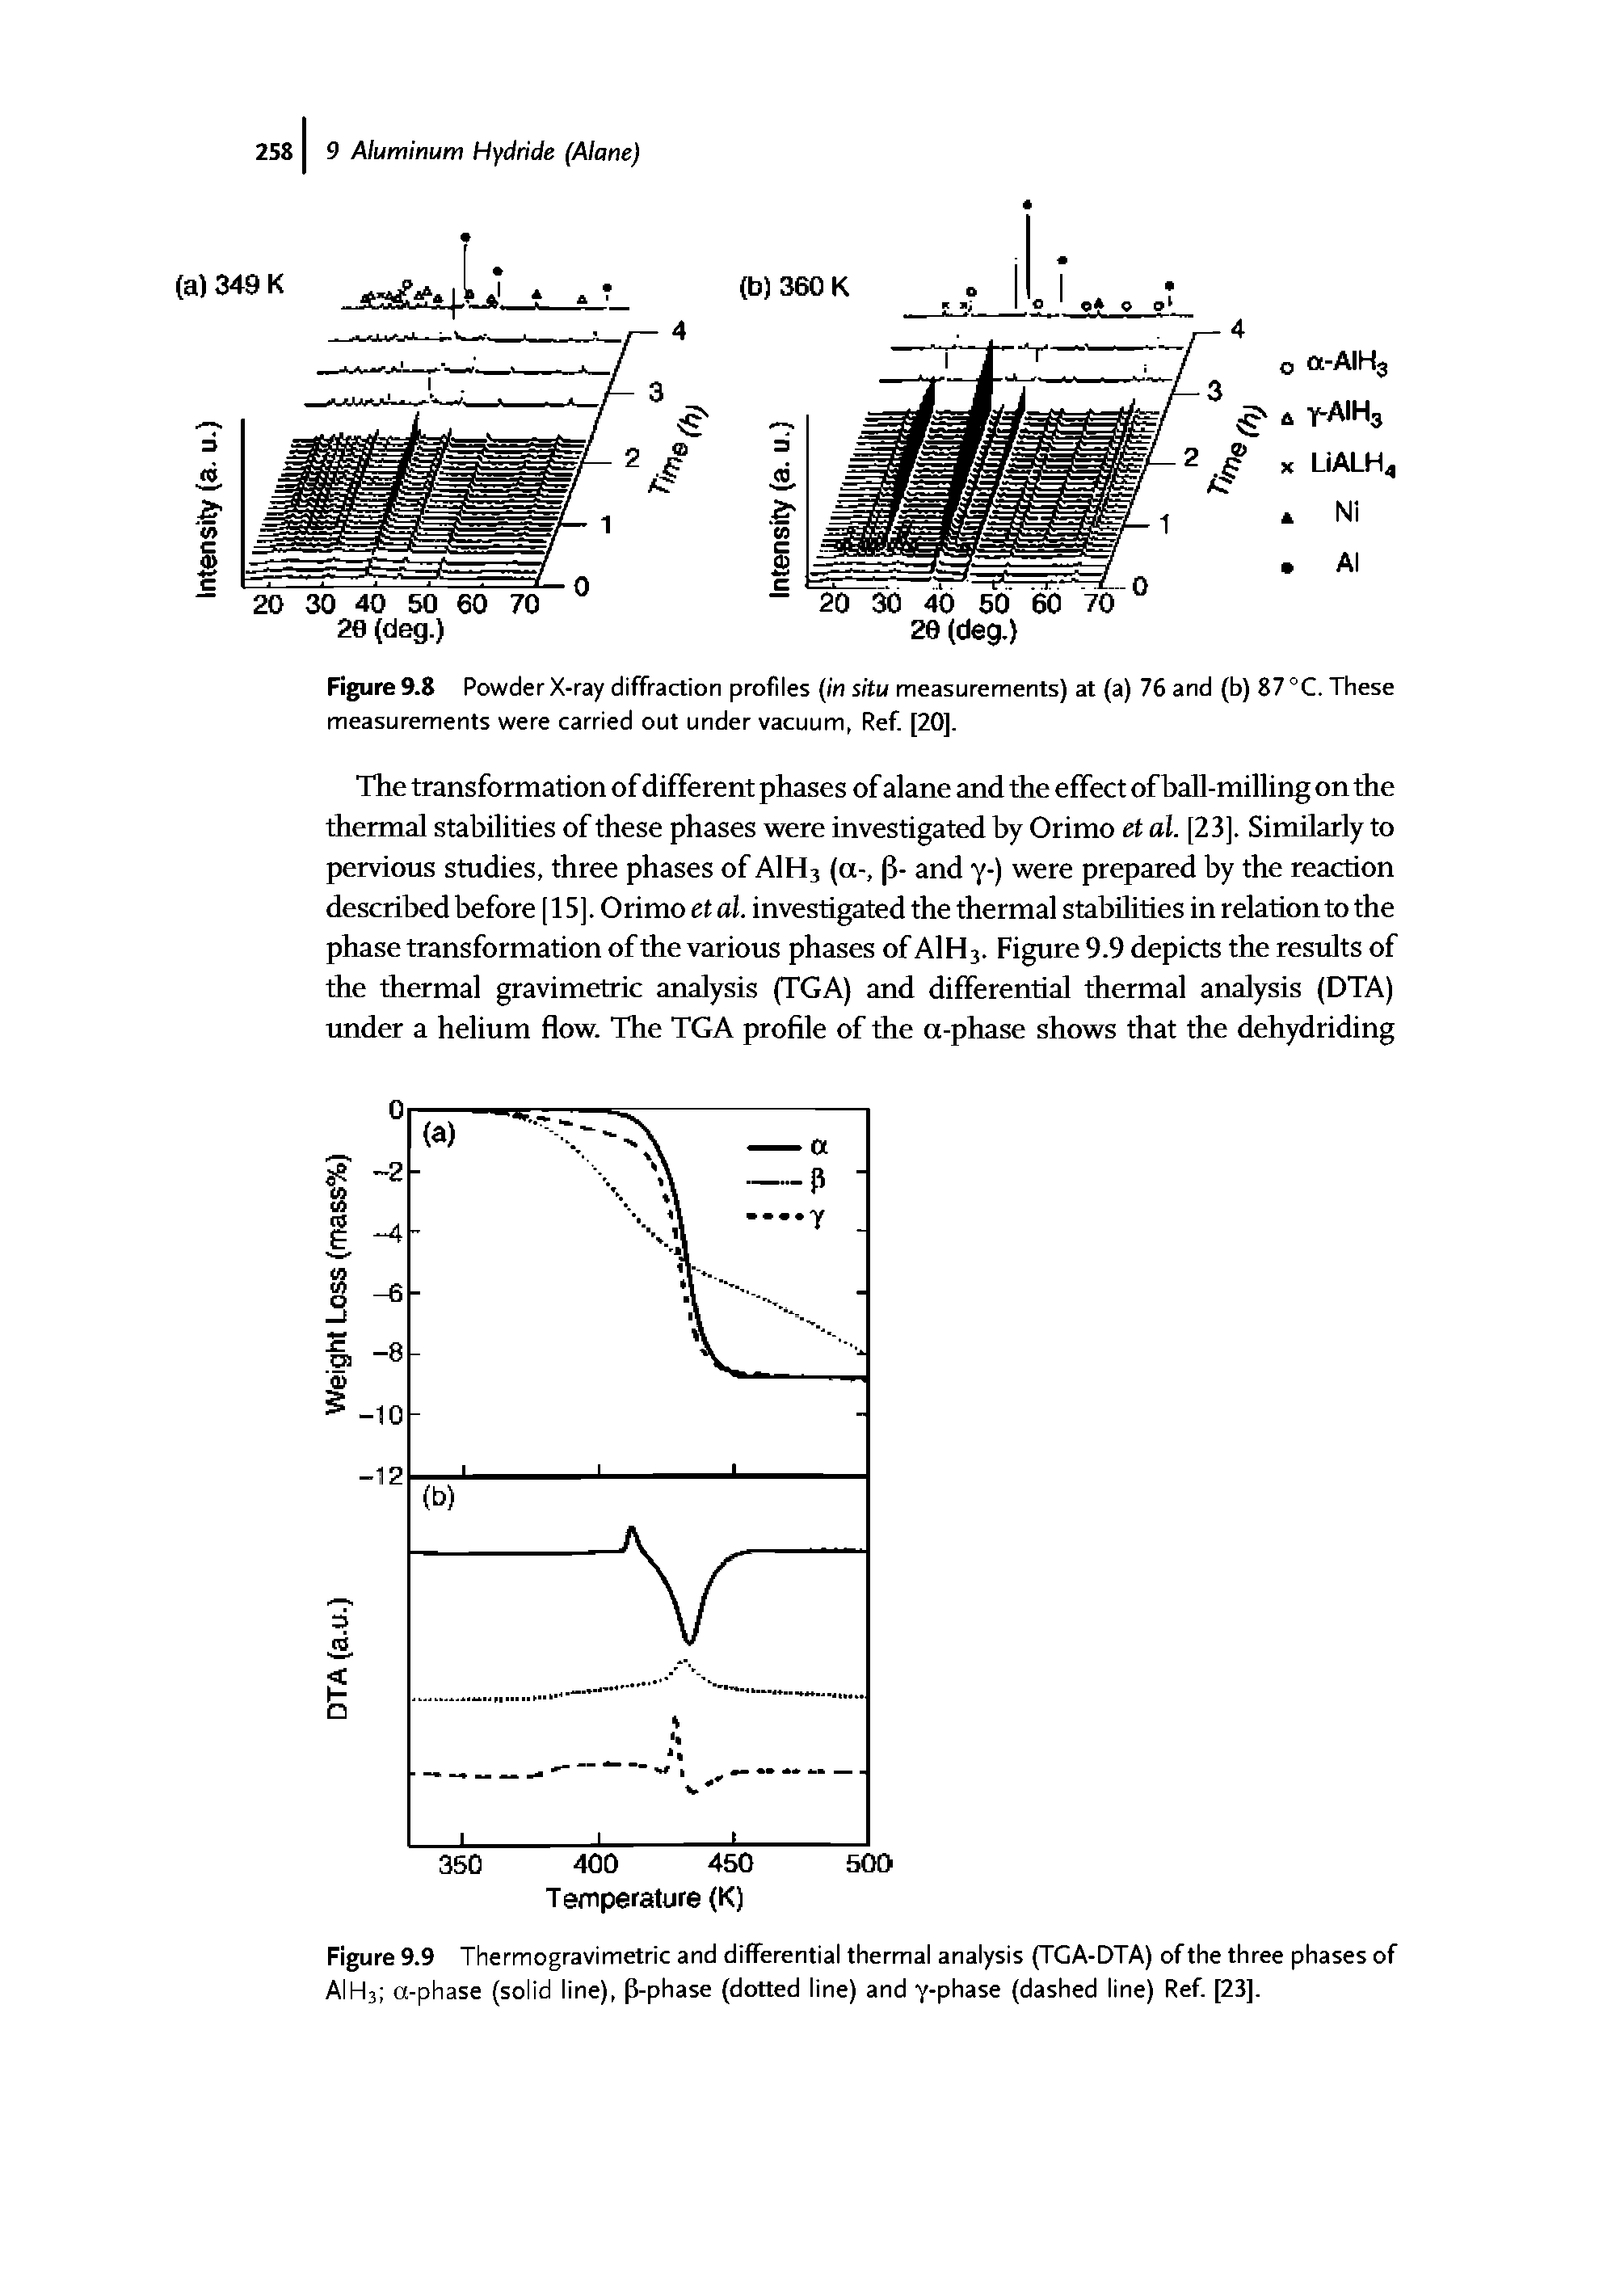 Figure 9.9 Thermogravimetric and differential thermal analysis (TCA-DTA) of the three phases of AIH3 a-phase (solid line), p-phase (dotted line) and y-phase (dashed line) Ref [23].